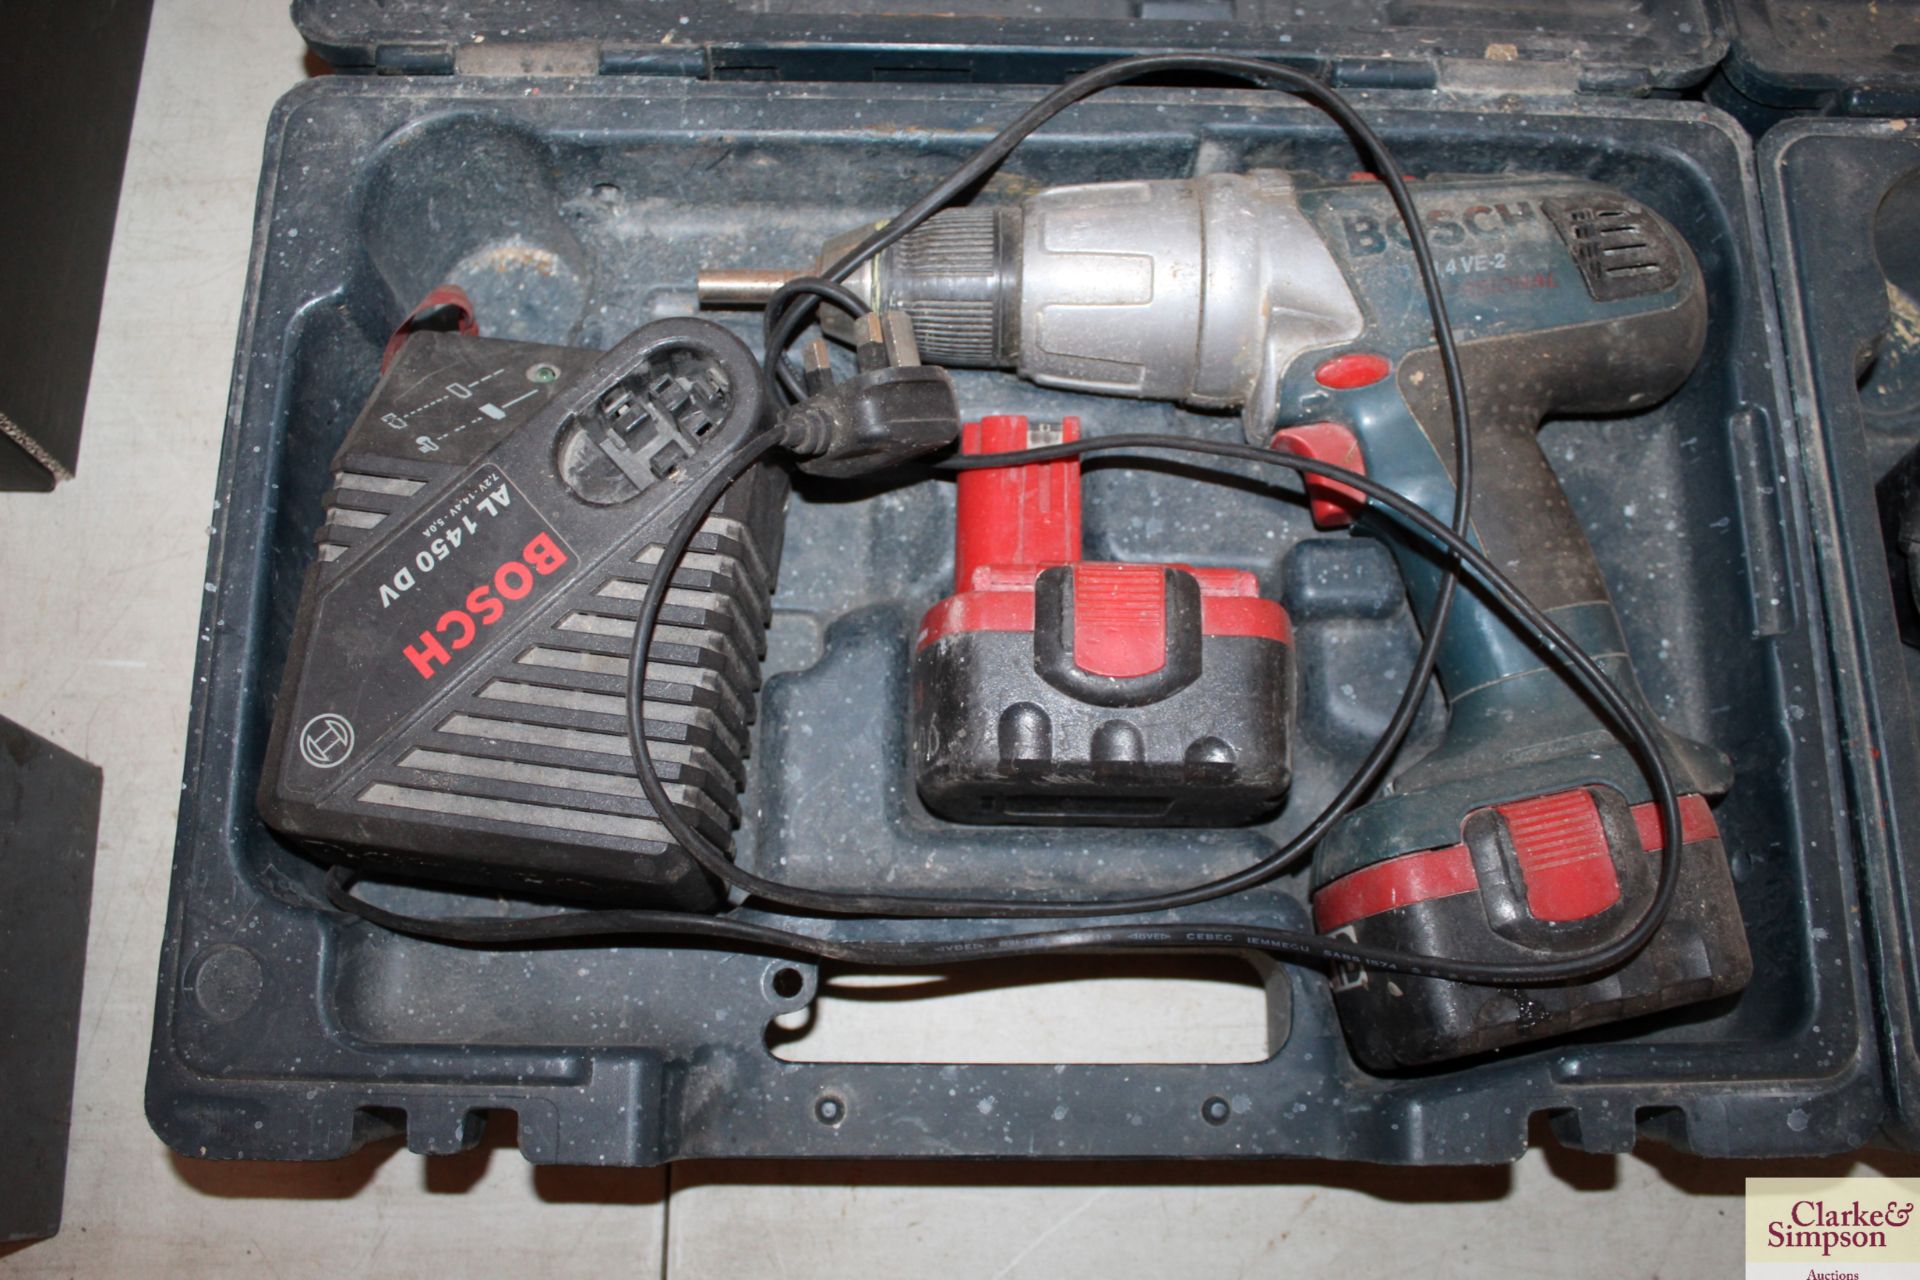 Bosch GSB cordless 14.4v drill with 2 batteries and charger. - Image 2 of 2